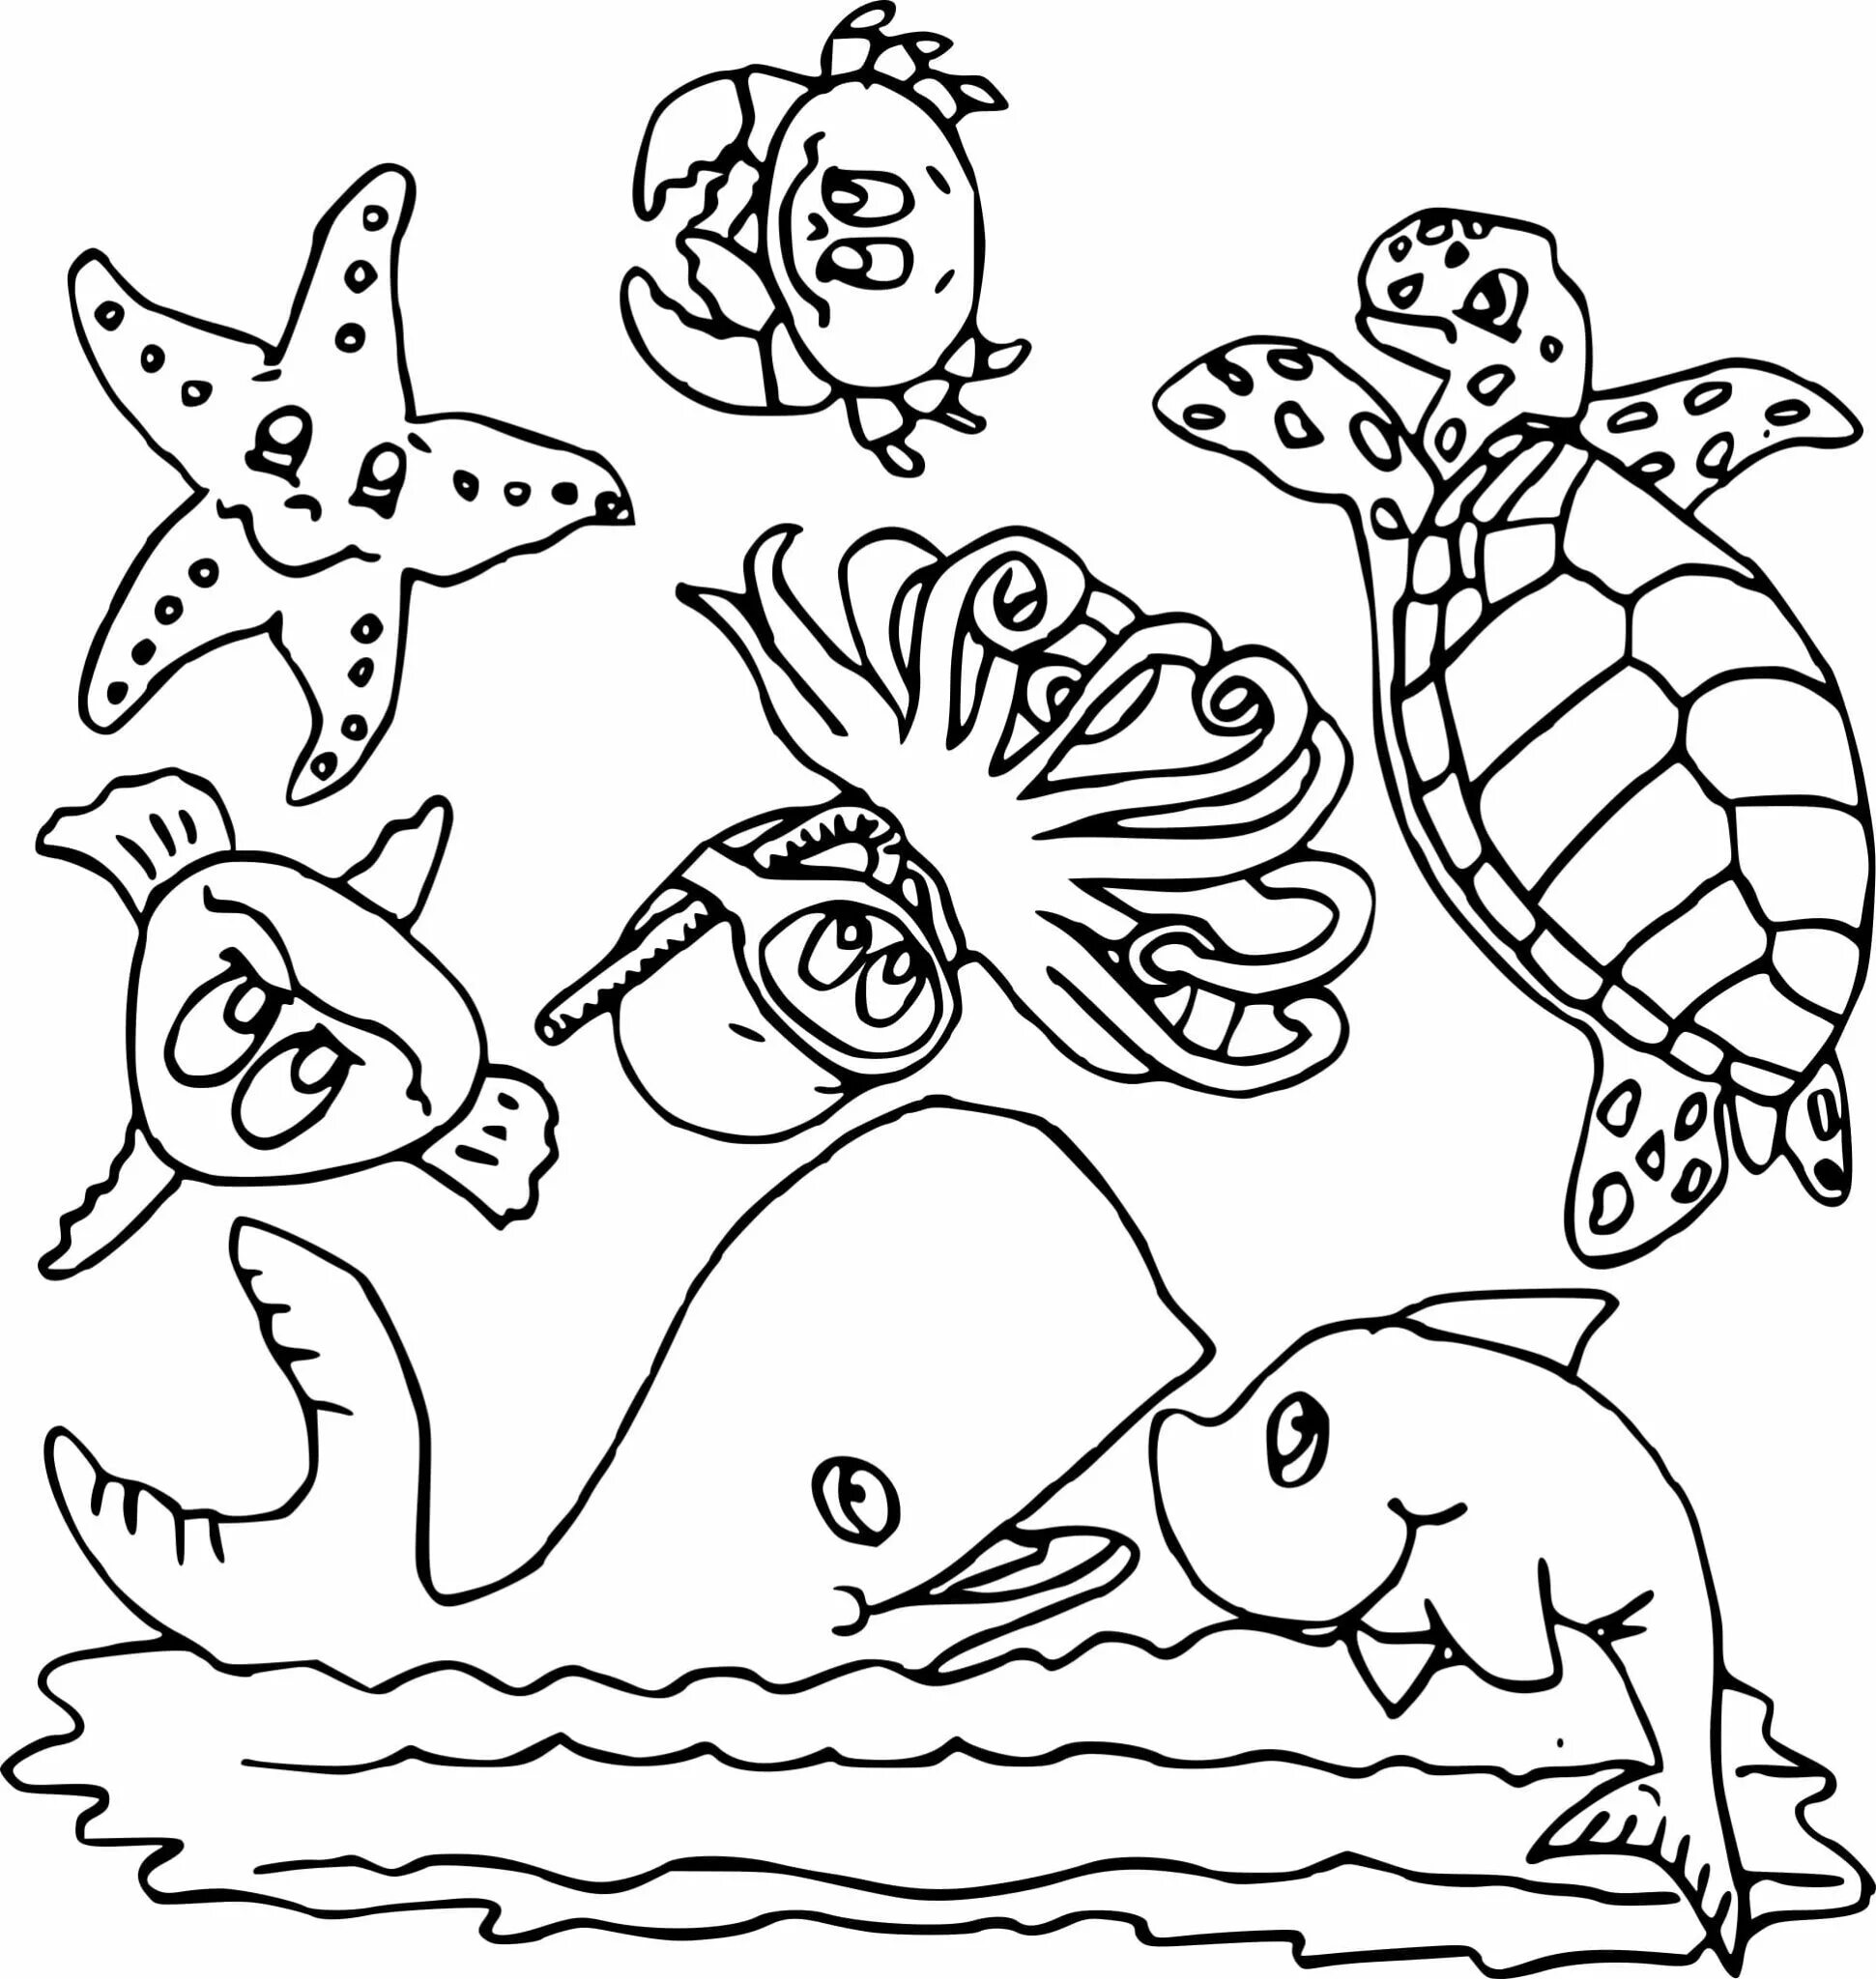 Elegant marine life coloring pages